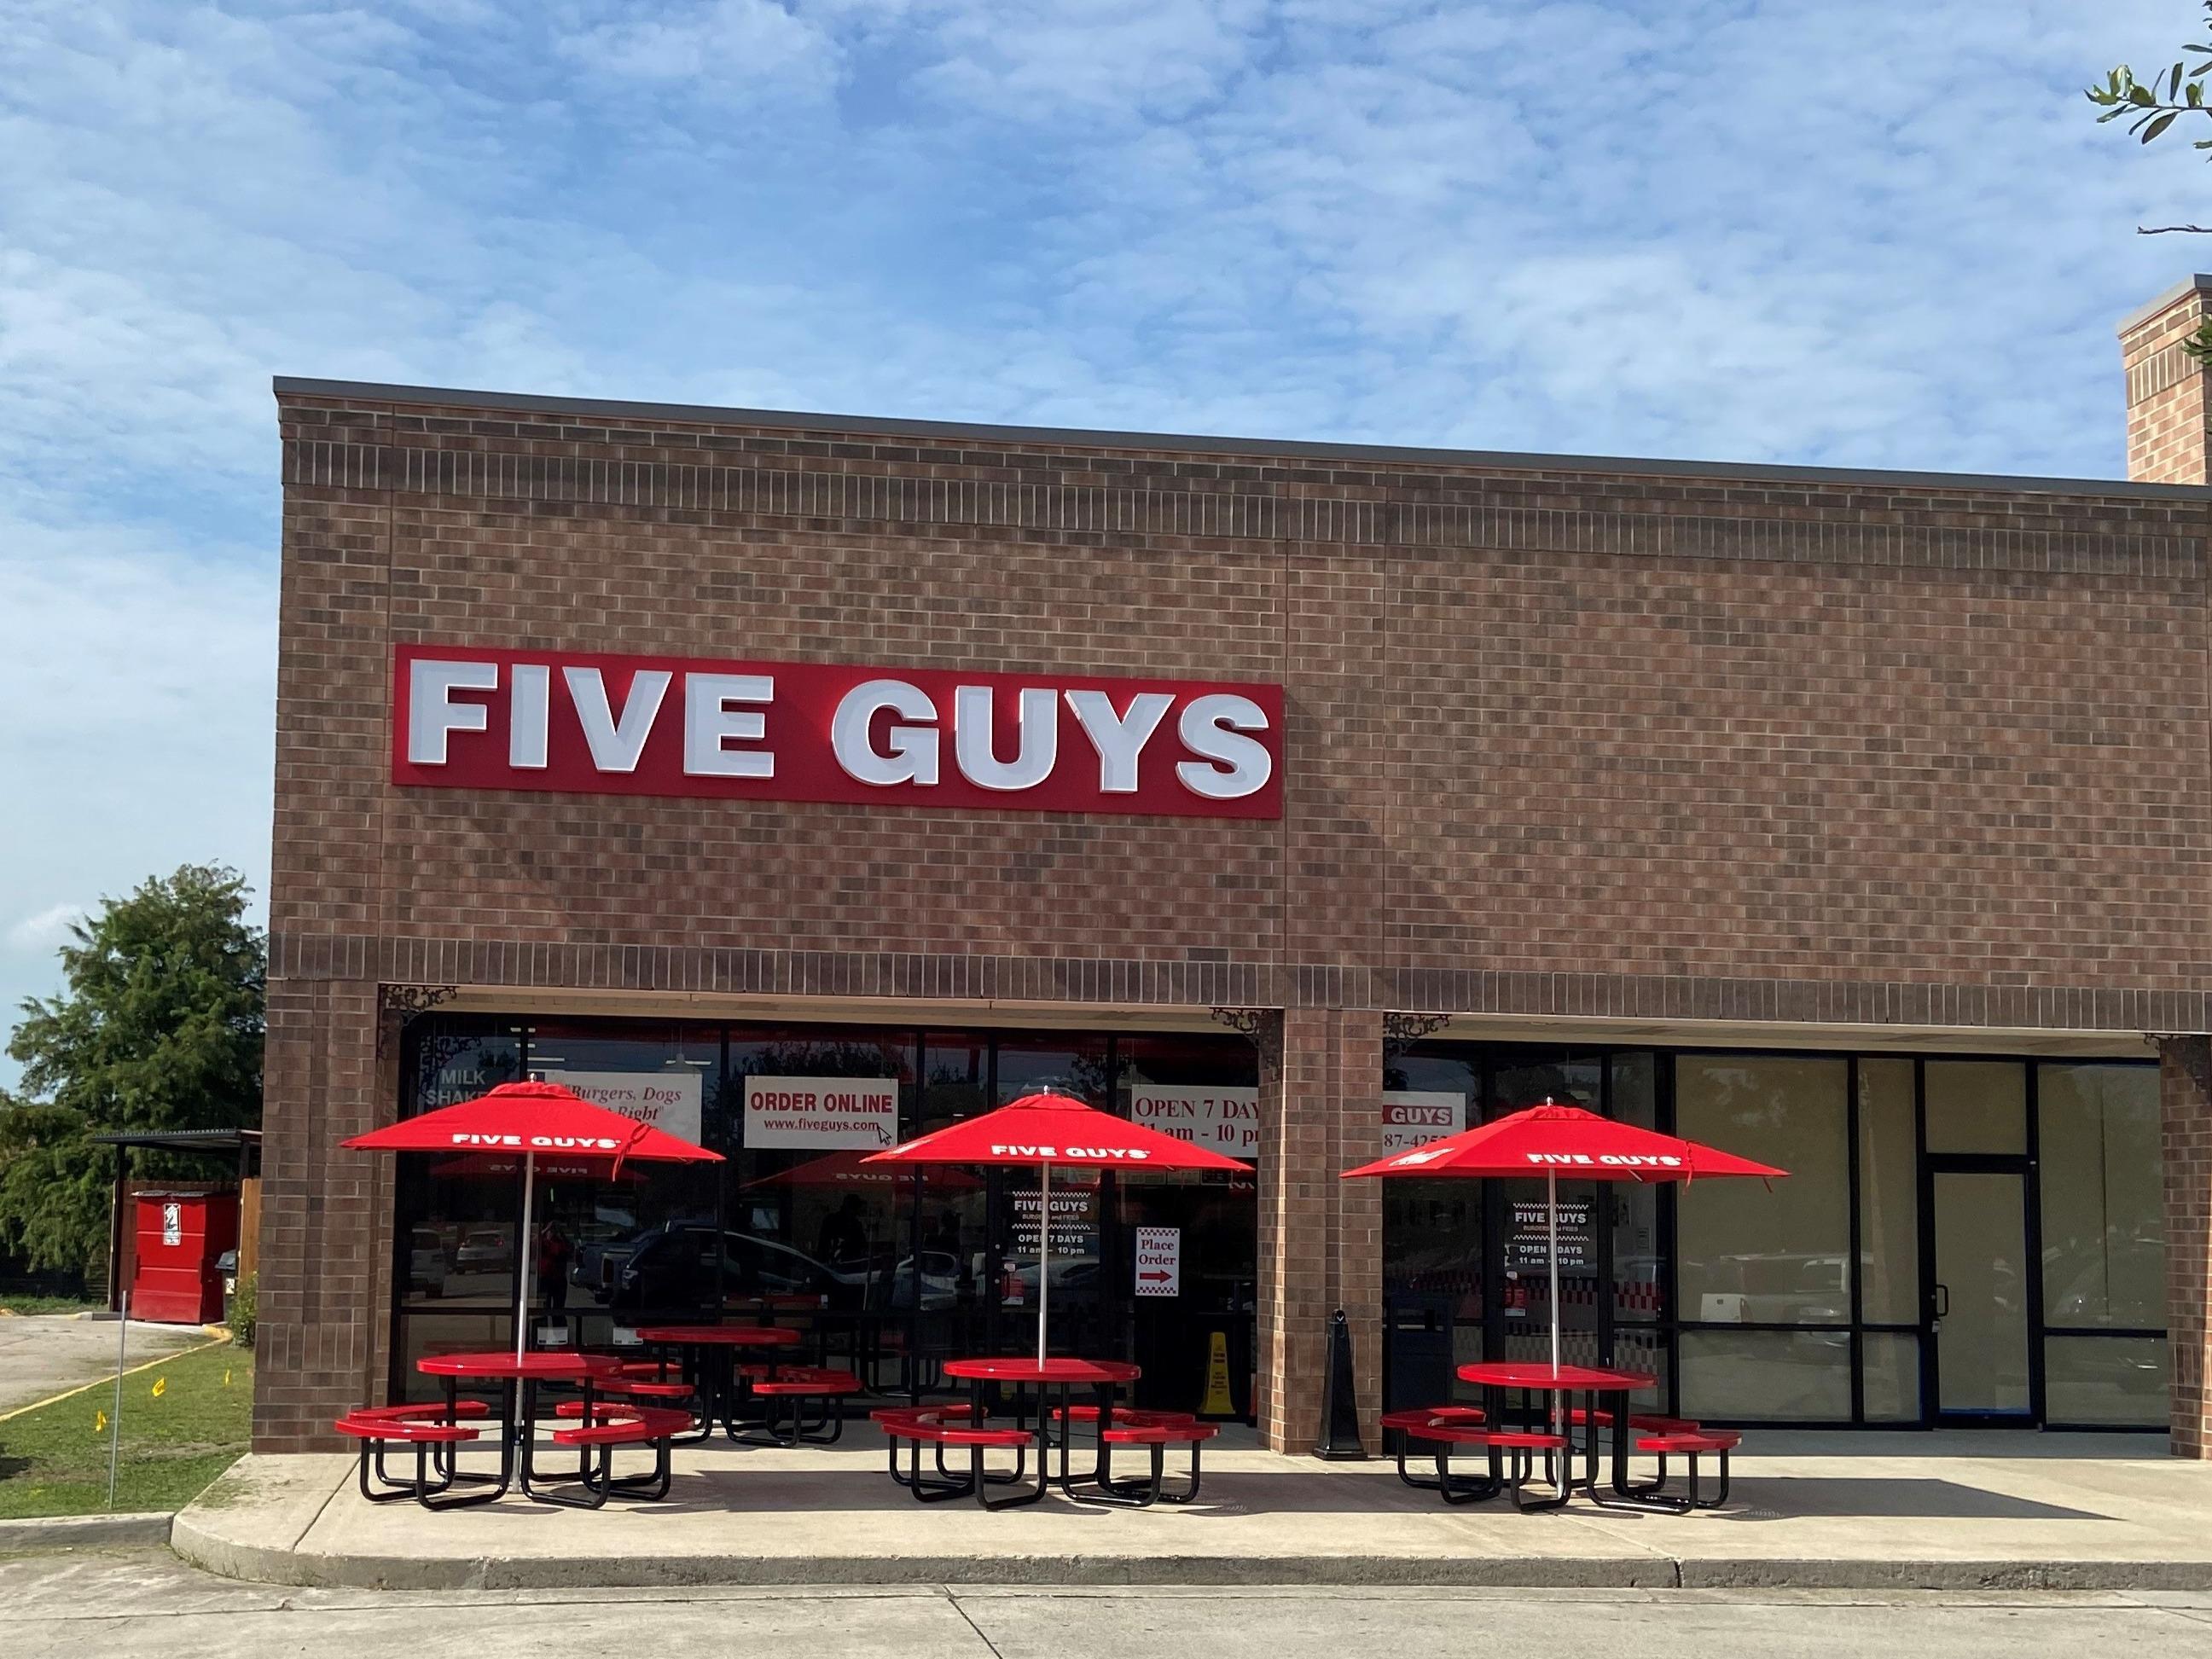 Entrance to the Five Guys at 819 W Esplanade Avenue in Kenner, Louisiana.